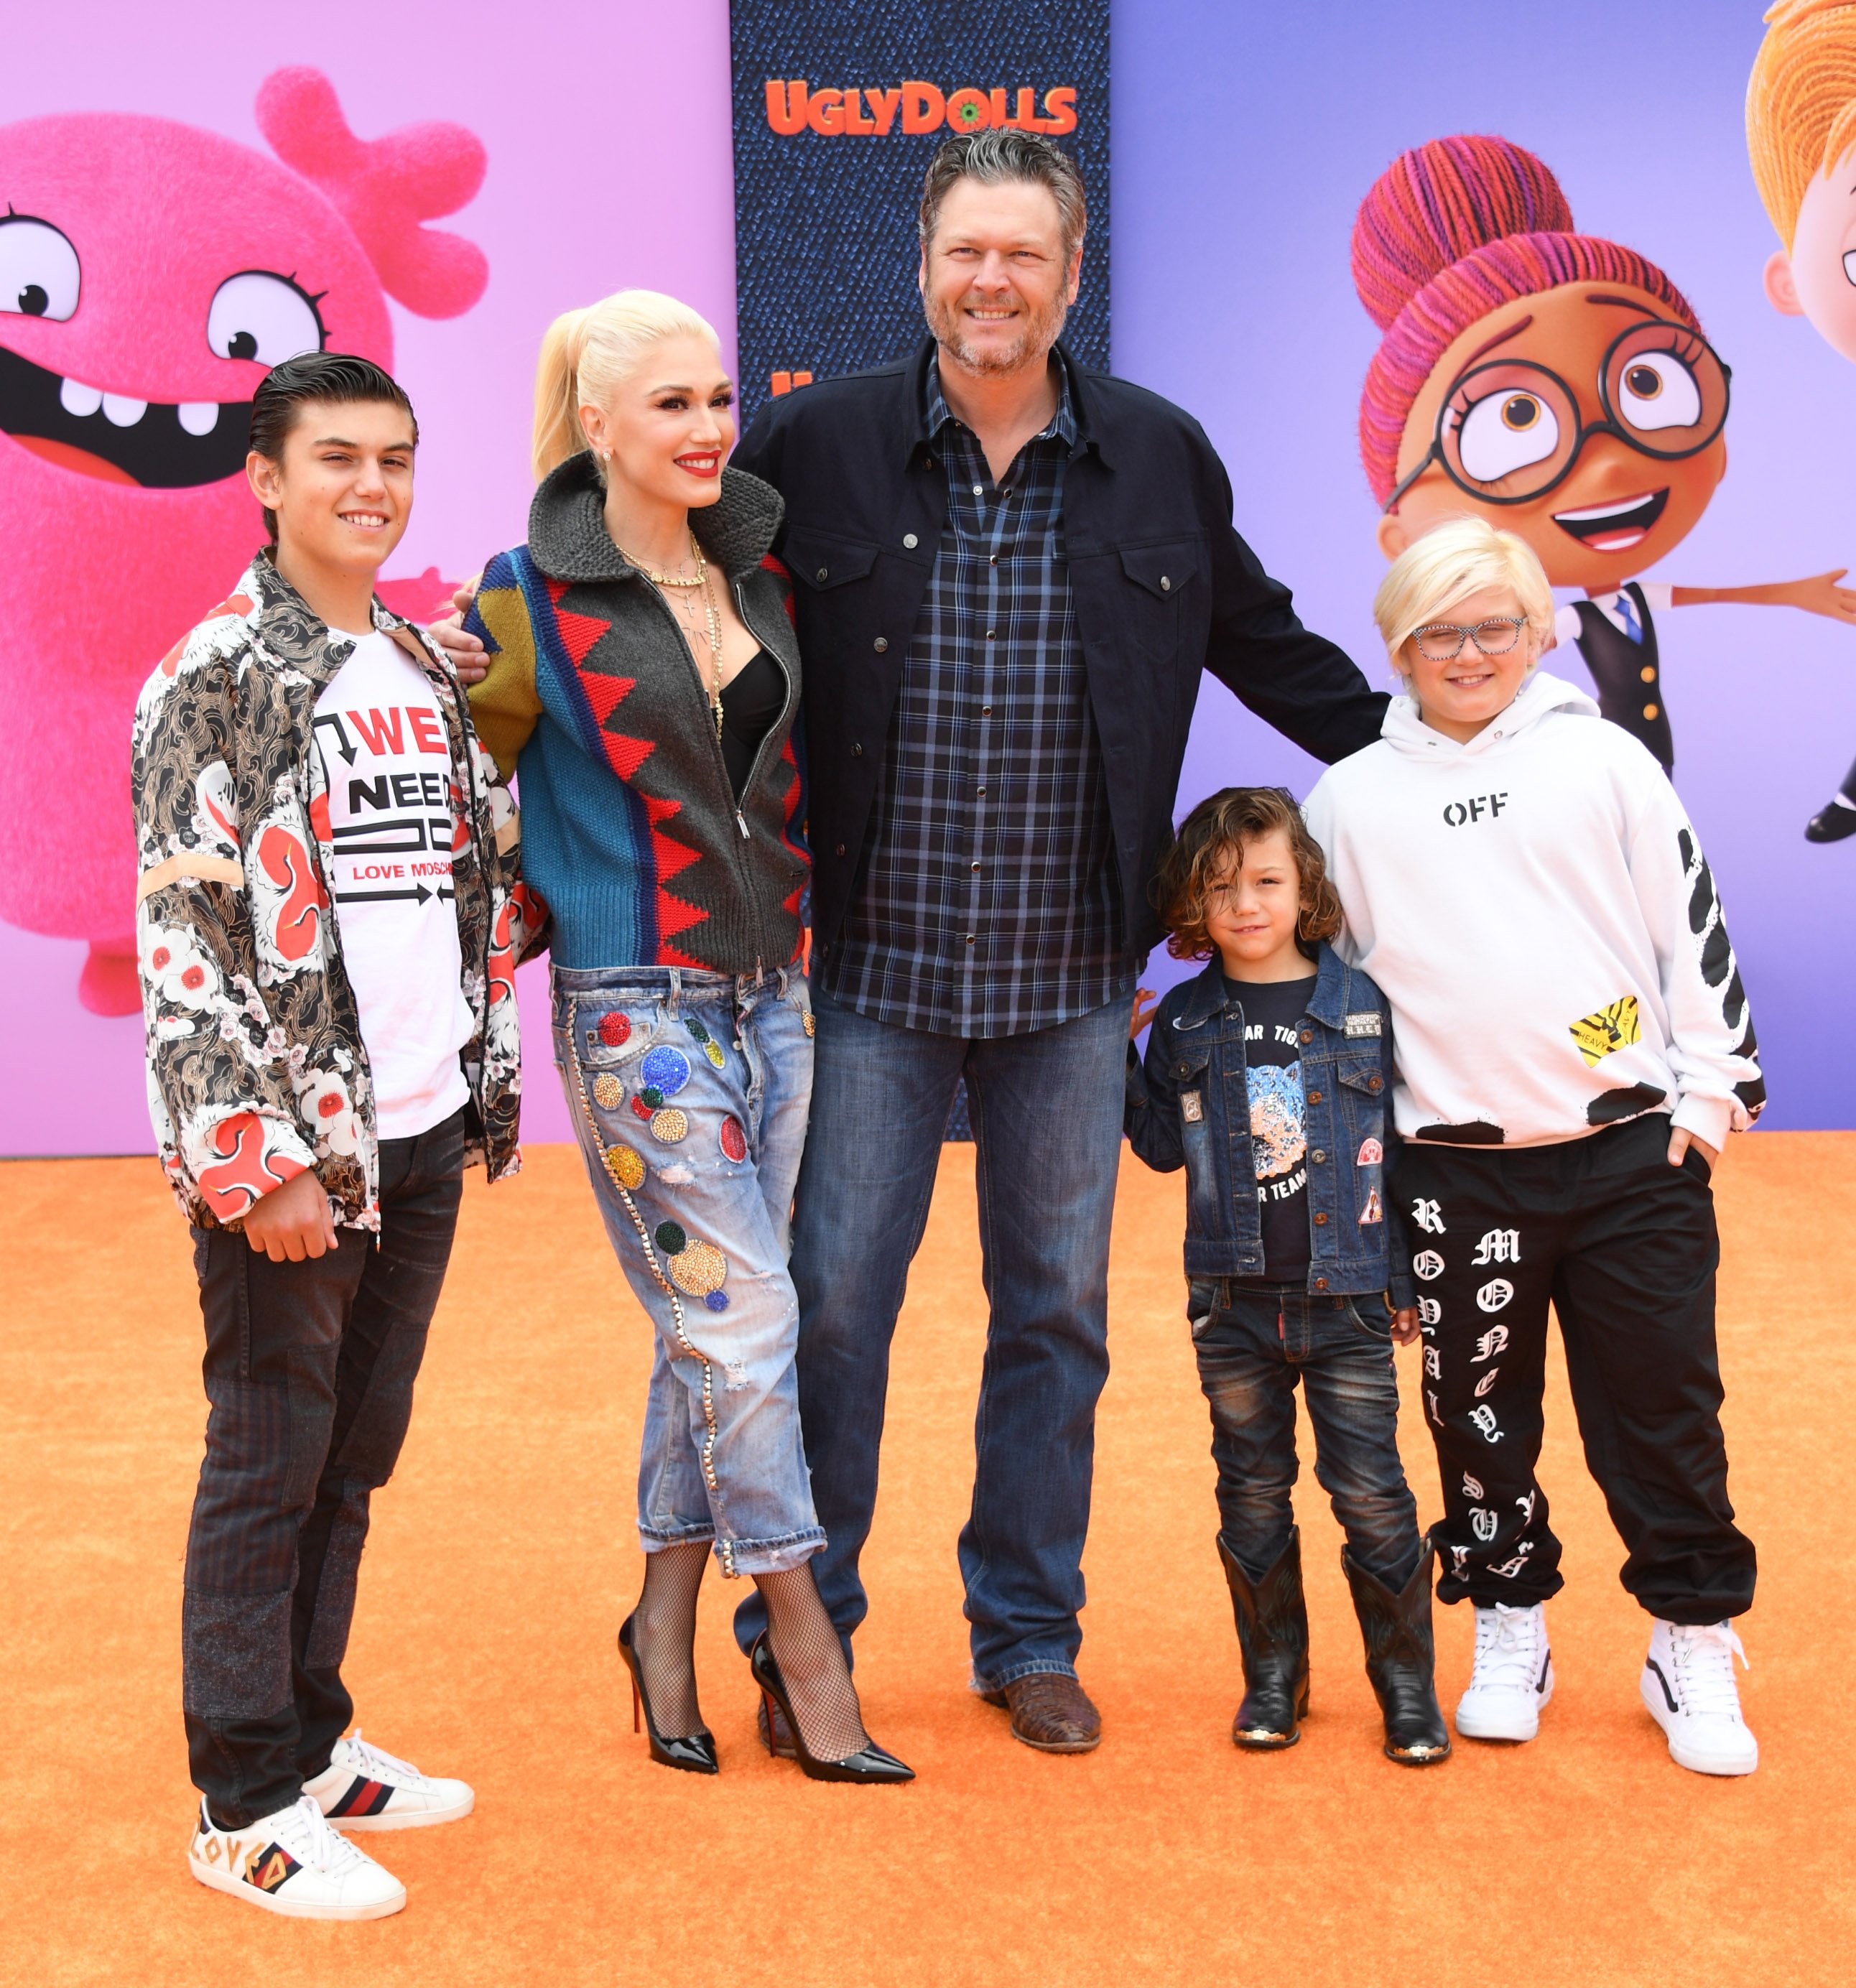 Kingston Rossdale, Gwen Stefani, Blake Shelton, Apollo Bowie Flynn Rossdale, and Zuma Nesta Rock Rossdale at the world premiere of STX Films' "UglyDolls" at Regal Cinemas L.A. Live on April 27, 2019 | Source: Getty Images